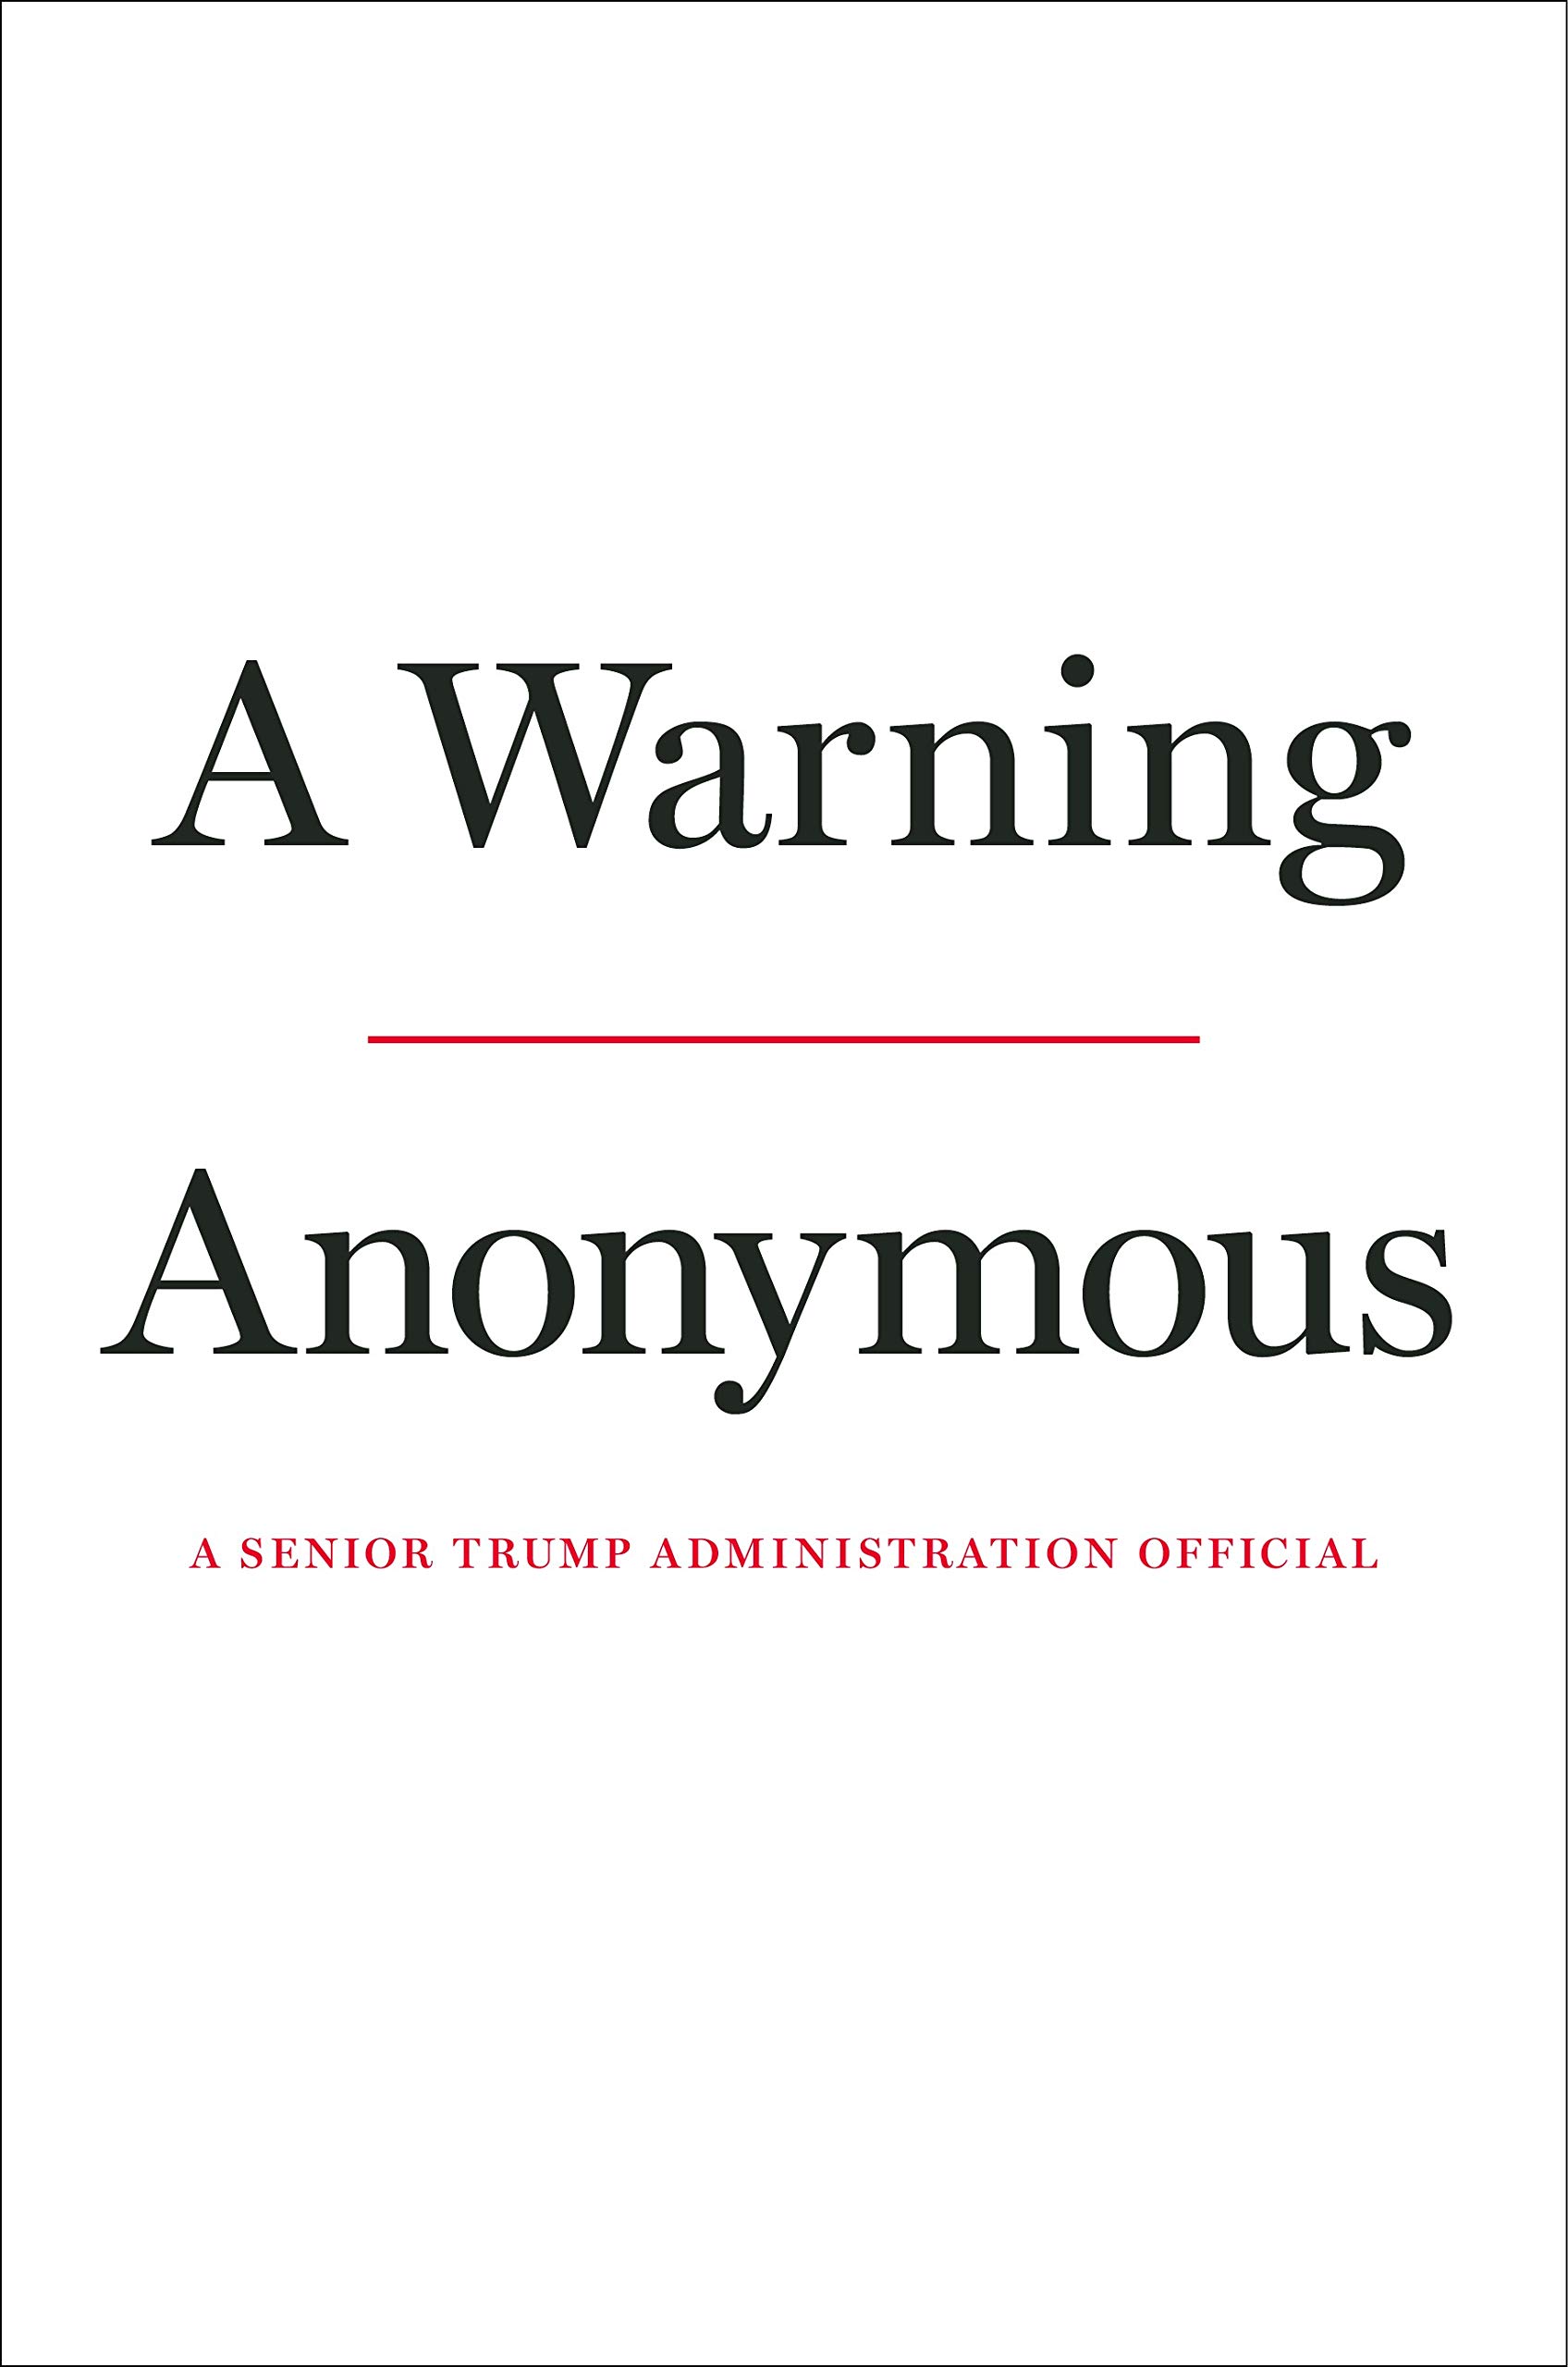 Image for "A Warning"